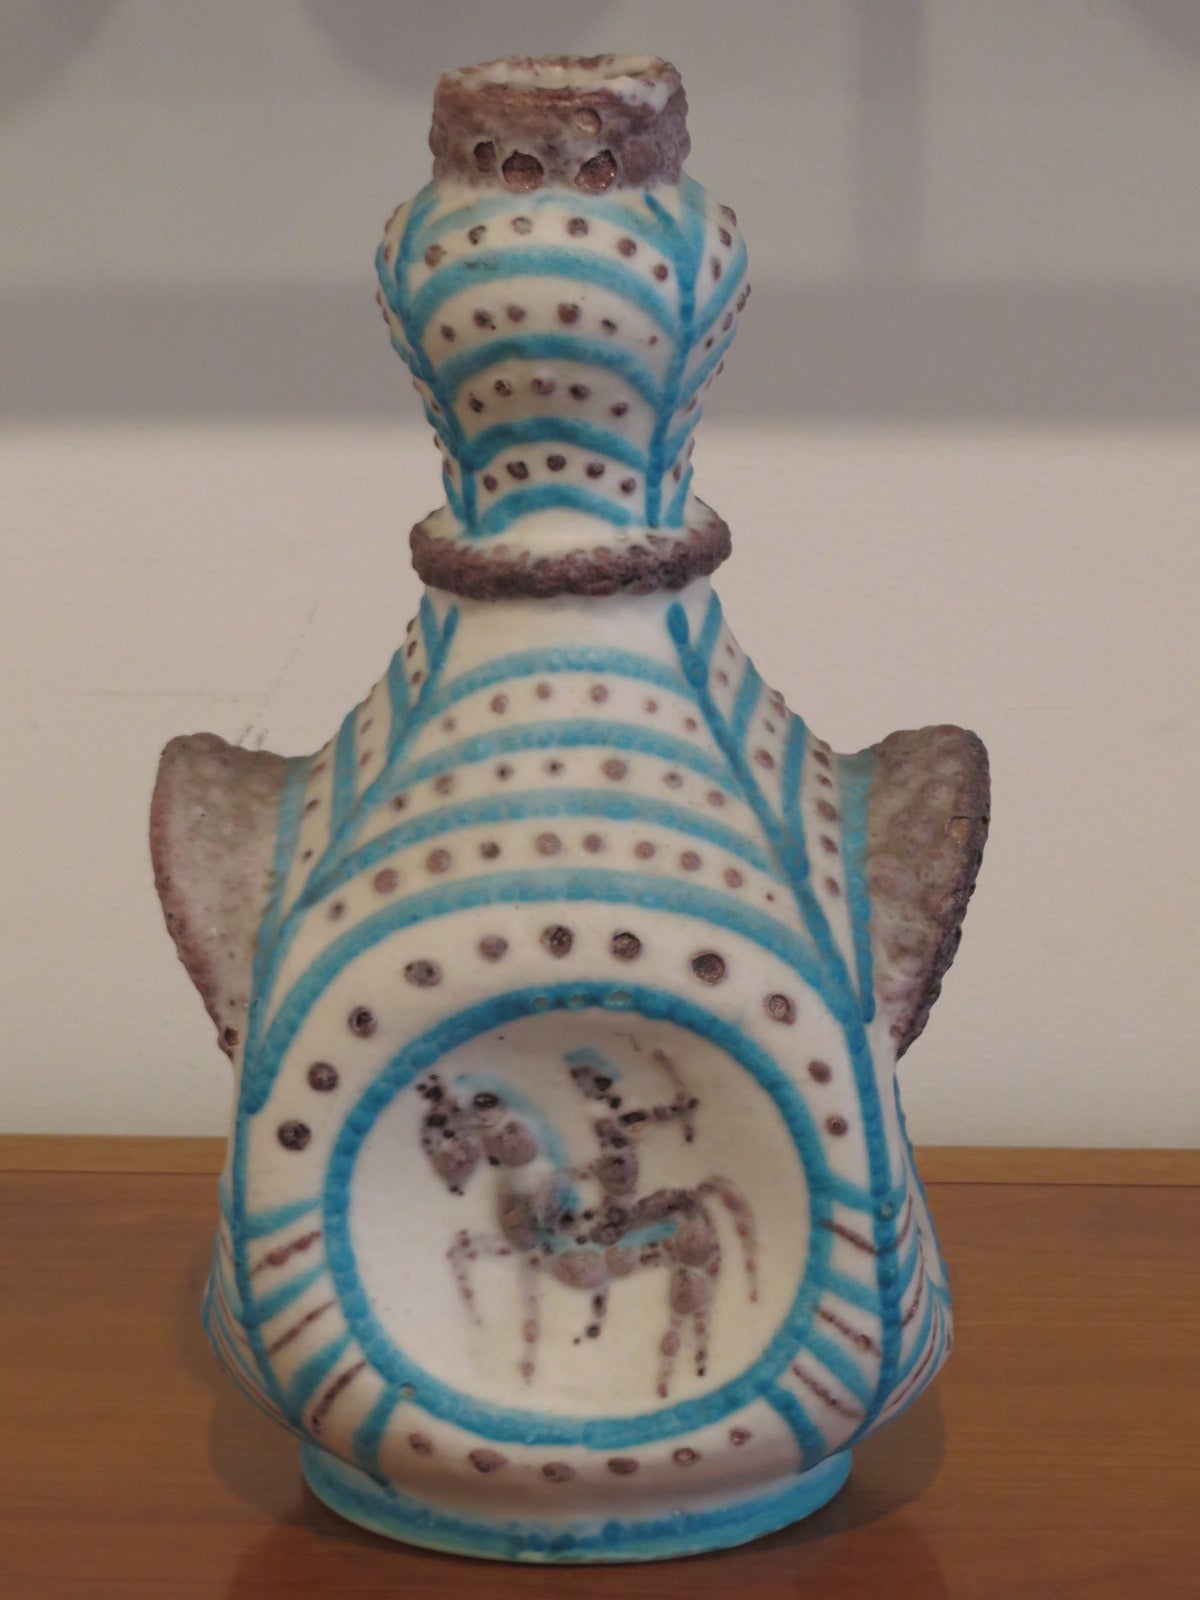 Hand thrown vase by Guido Gambone with turquoise and brown designs on white glaze.